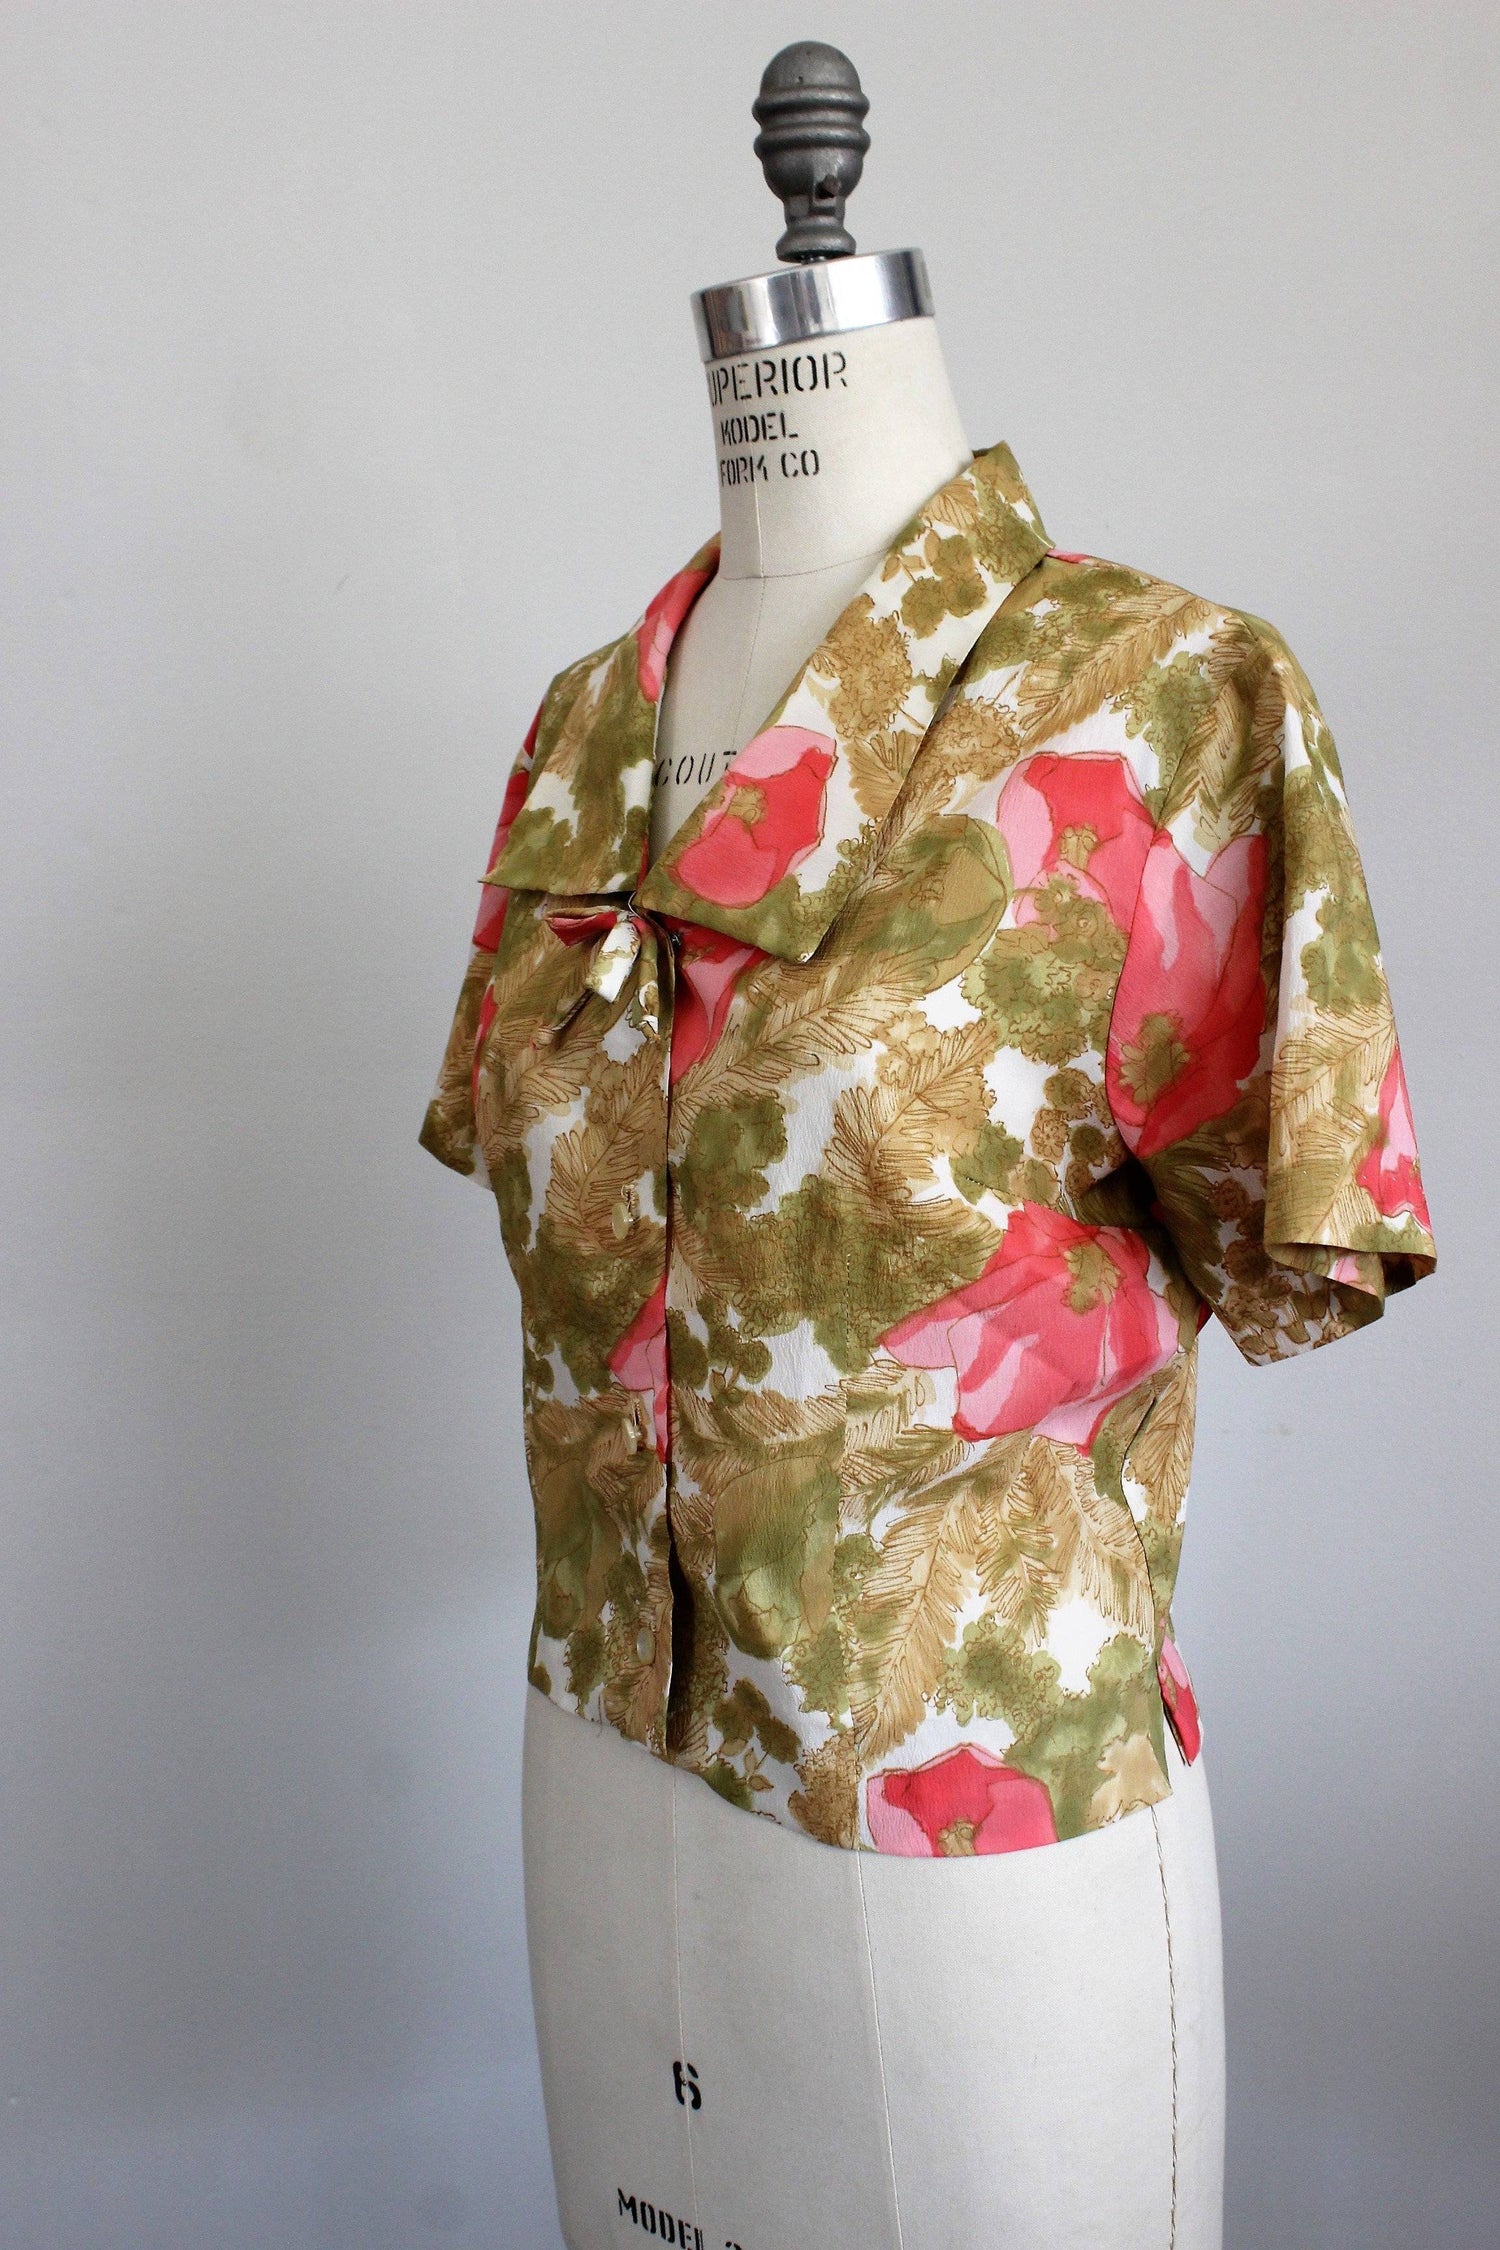 Vintage 1960s Floral Blouse by Teddi of California-Toadstool Farm Vintage-1960s Blouse,1960s Top,Cropped Top,Floral Blouse,Floral Print,Pussy Bow,Teddi of California,Vintage,Vintage Clothing,Vintage Shirt